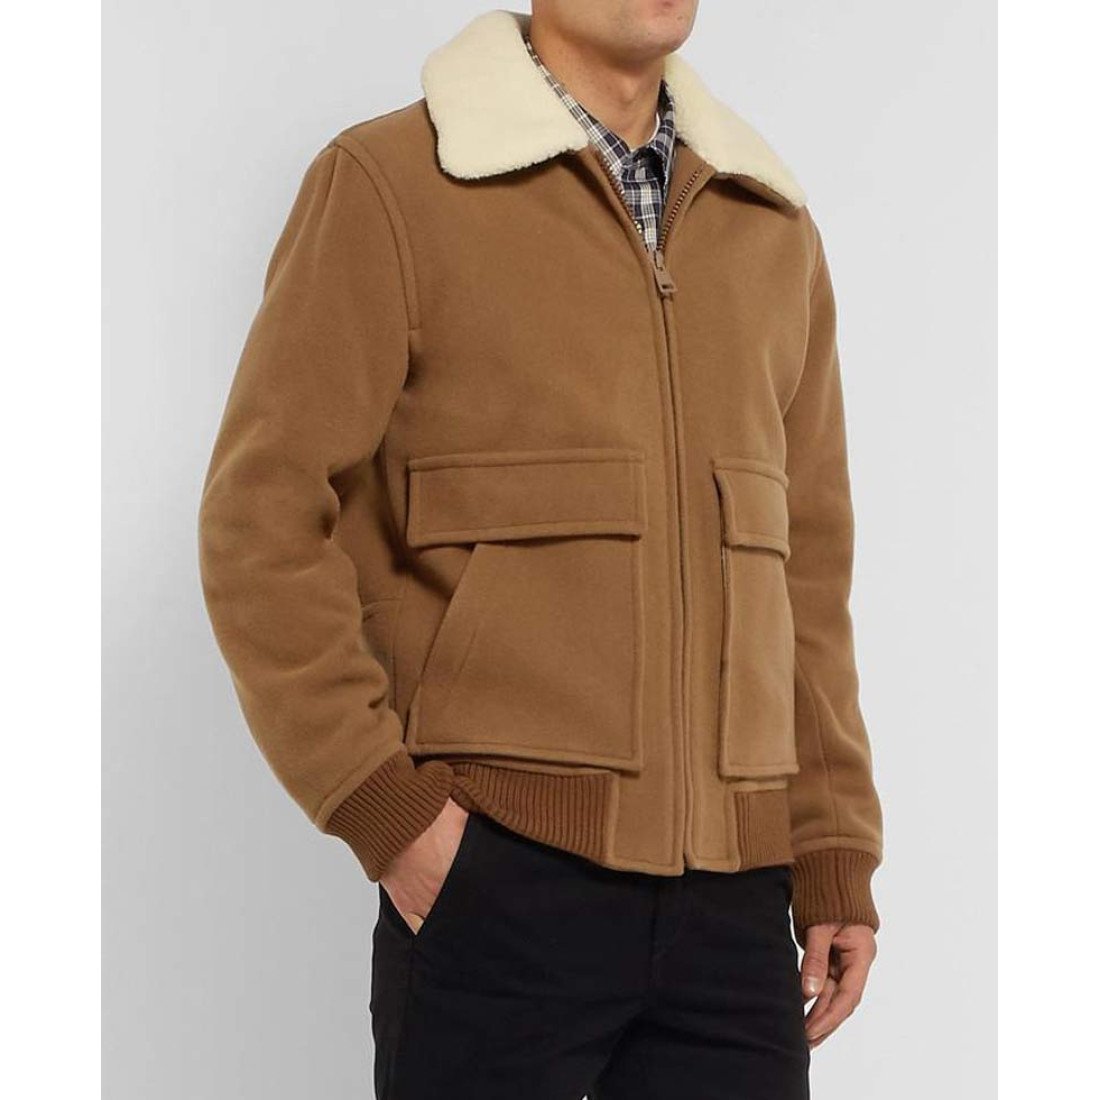 Men's Wool Bomber Jacket with Shearling Trimmed - Films Jackets